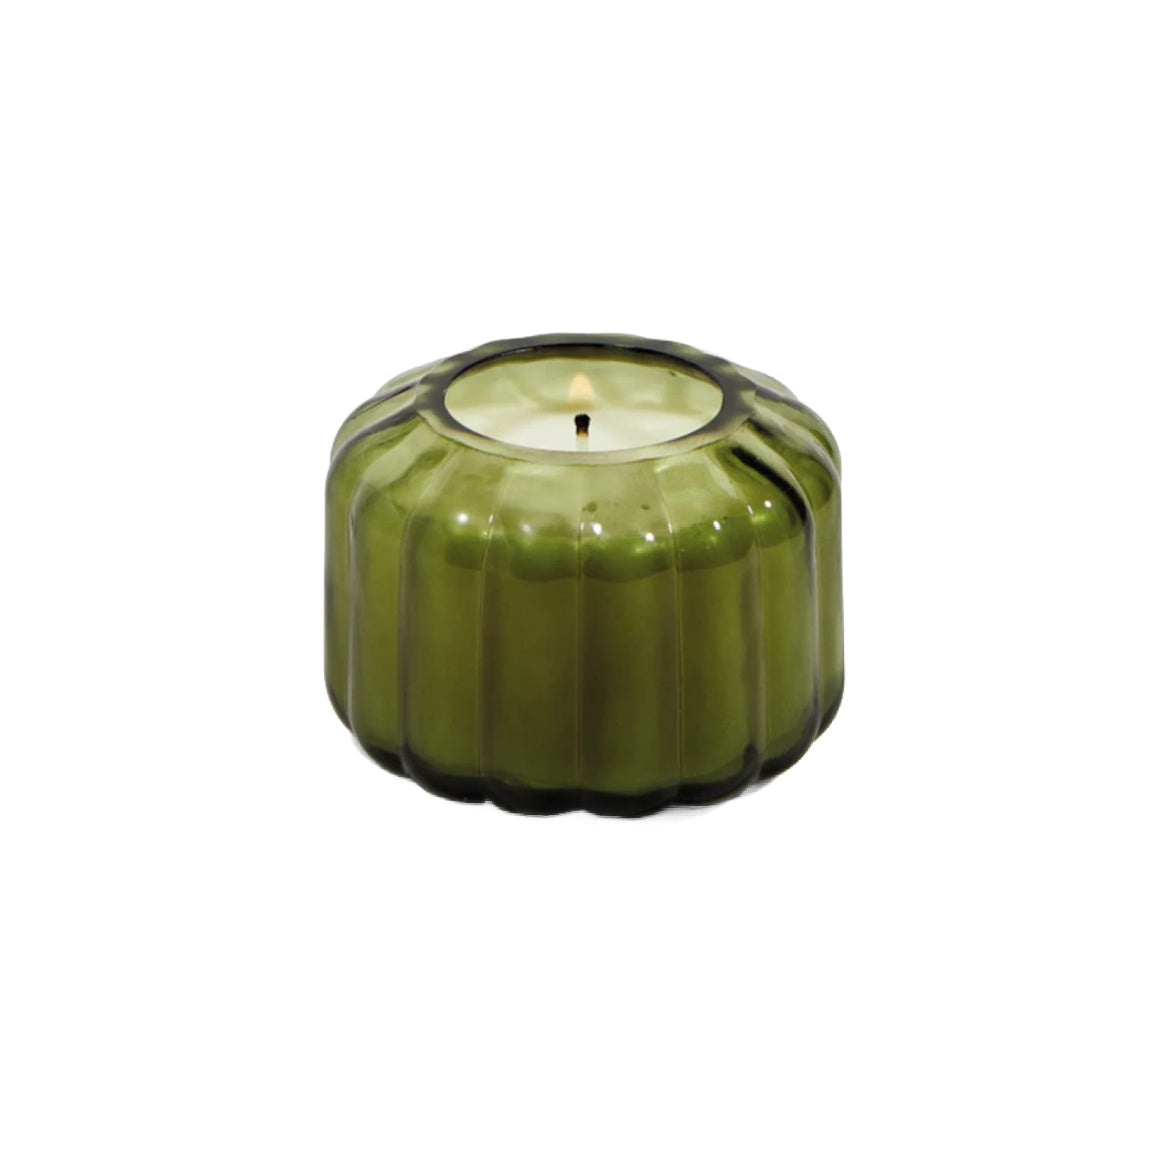 Ripple Transparent Green Glass Candle 4.5oz.